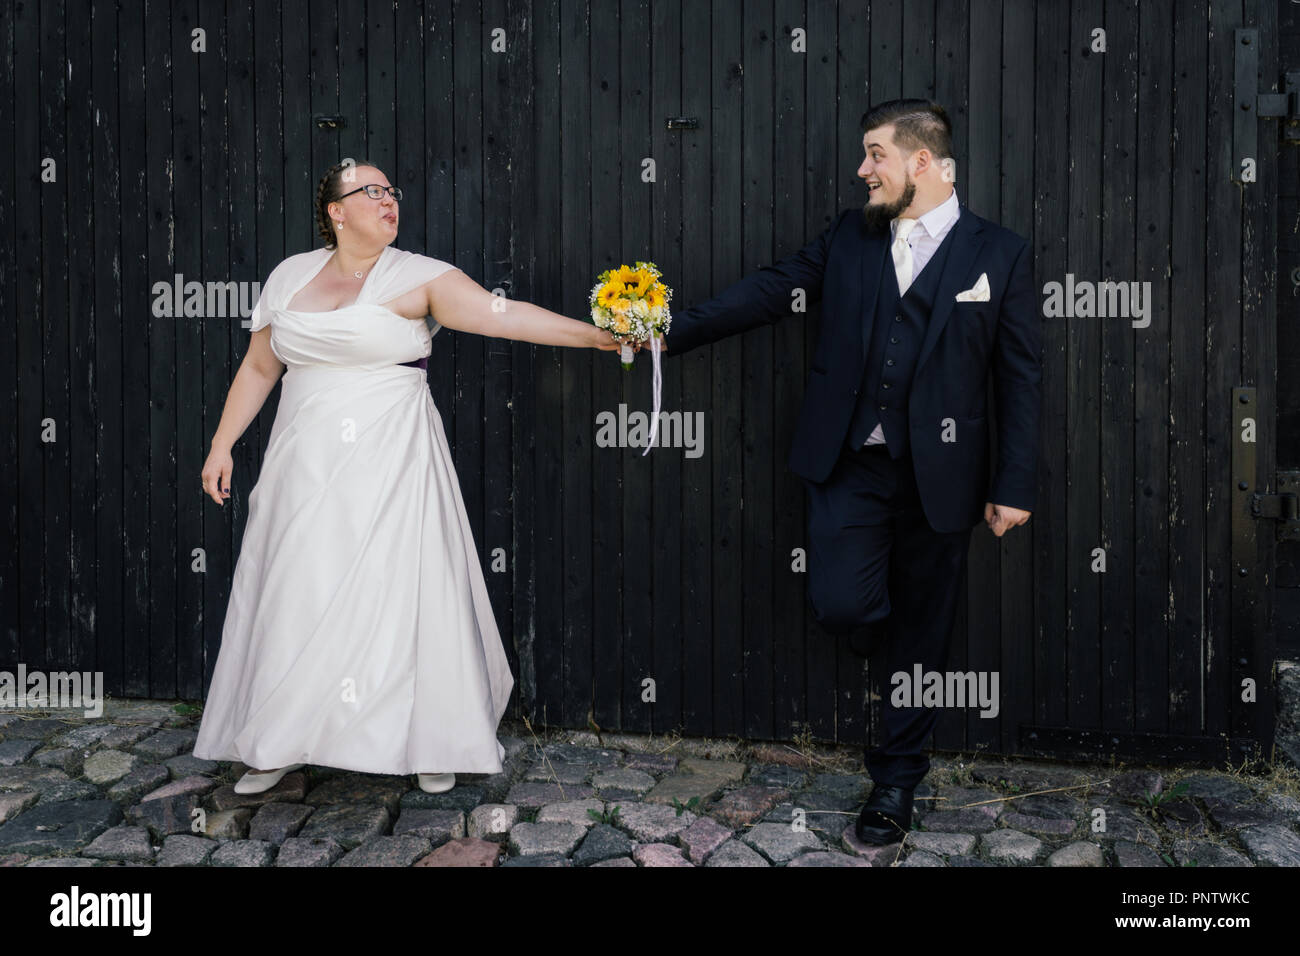 Bride and groom are holding a bunch of flowers Stock Photo